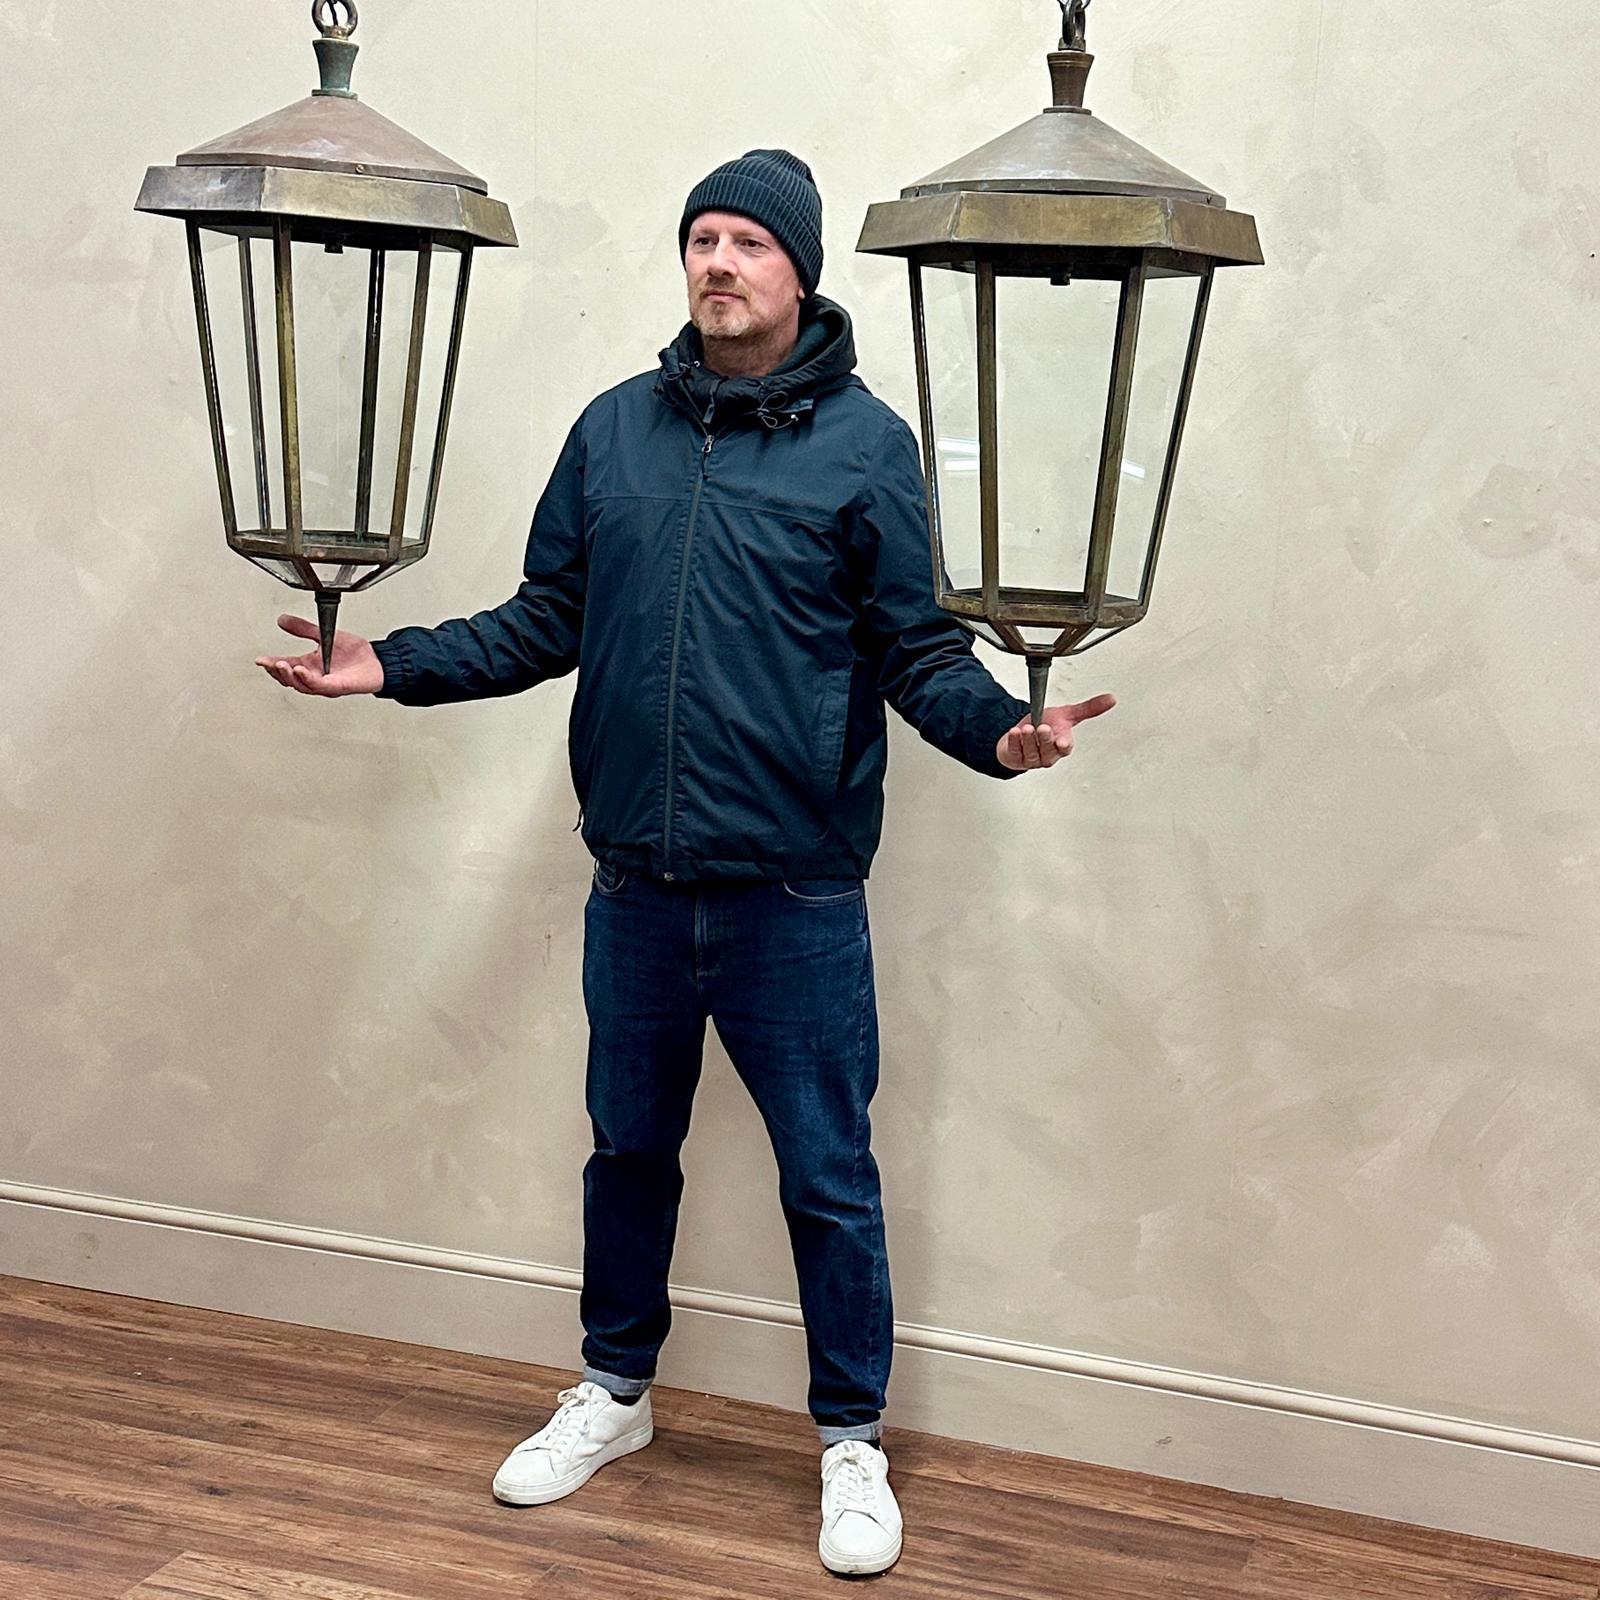 Huge pair of brass lanterns , 6 sided with glazed bottom panels .
These were originally hung either side of an amazing house in Wales , we also have another that was hung in the porch thats less weathered .
These are used to this day in the Tineside